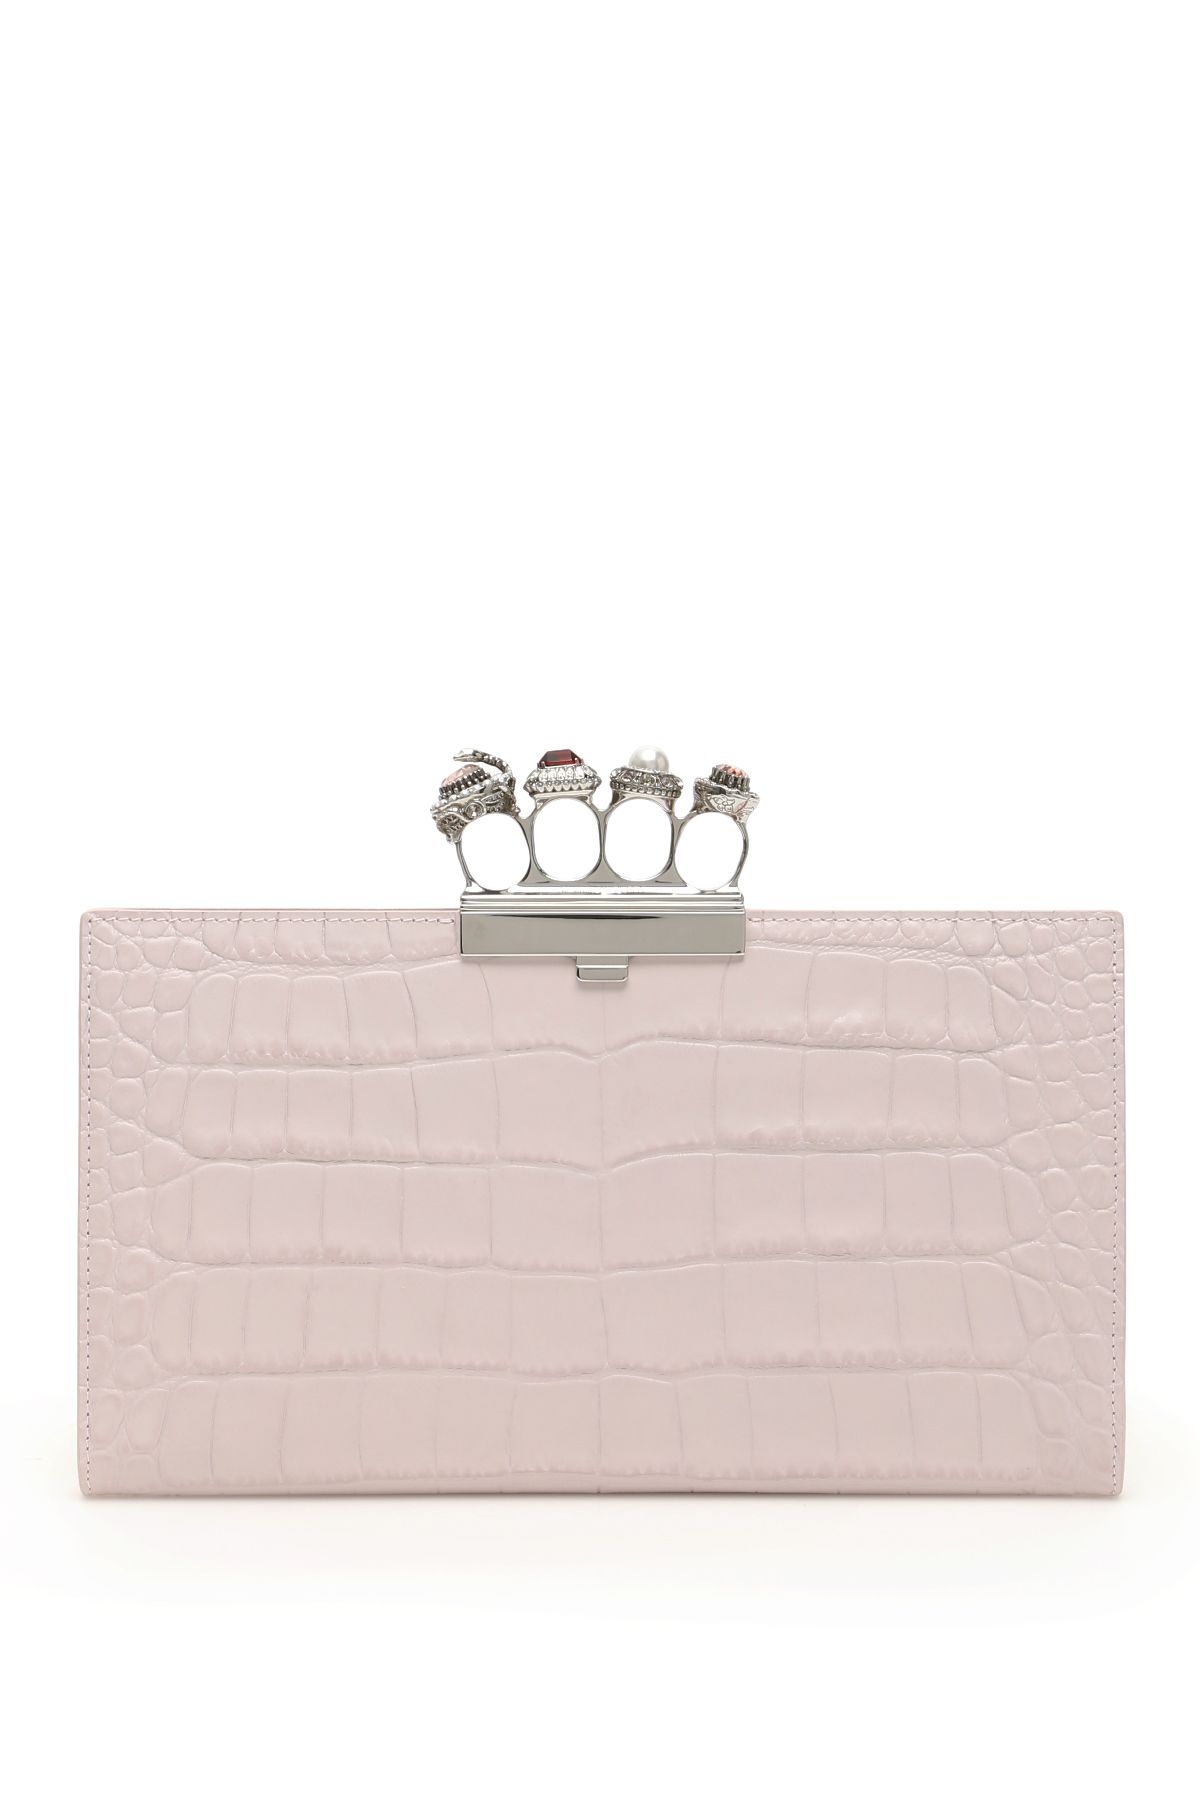 ALEXANDER MCQUEEN JEWELLED CLUTCH WITH FOUR RINGS,10874415